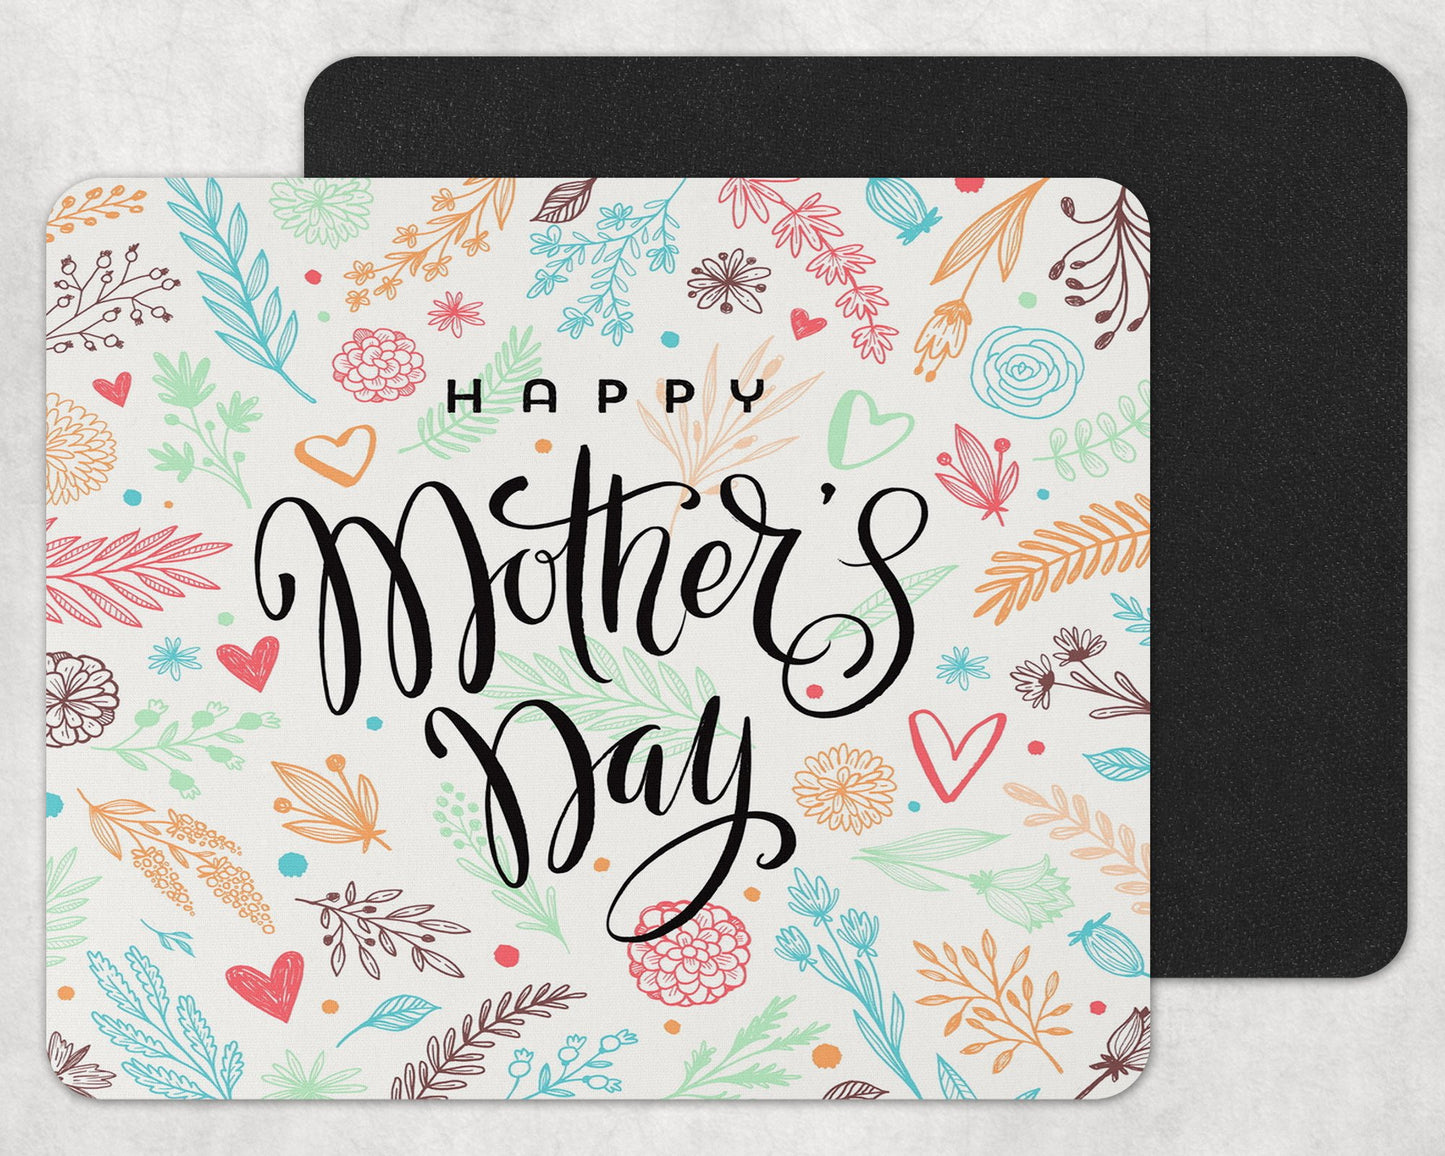 Happy Mothers Day Mousepad